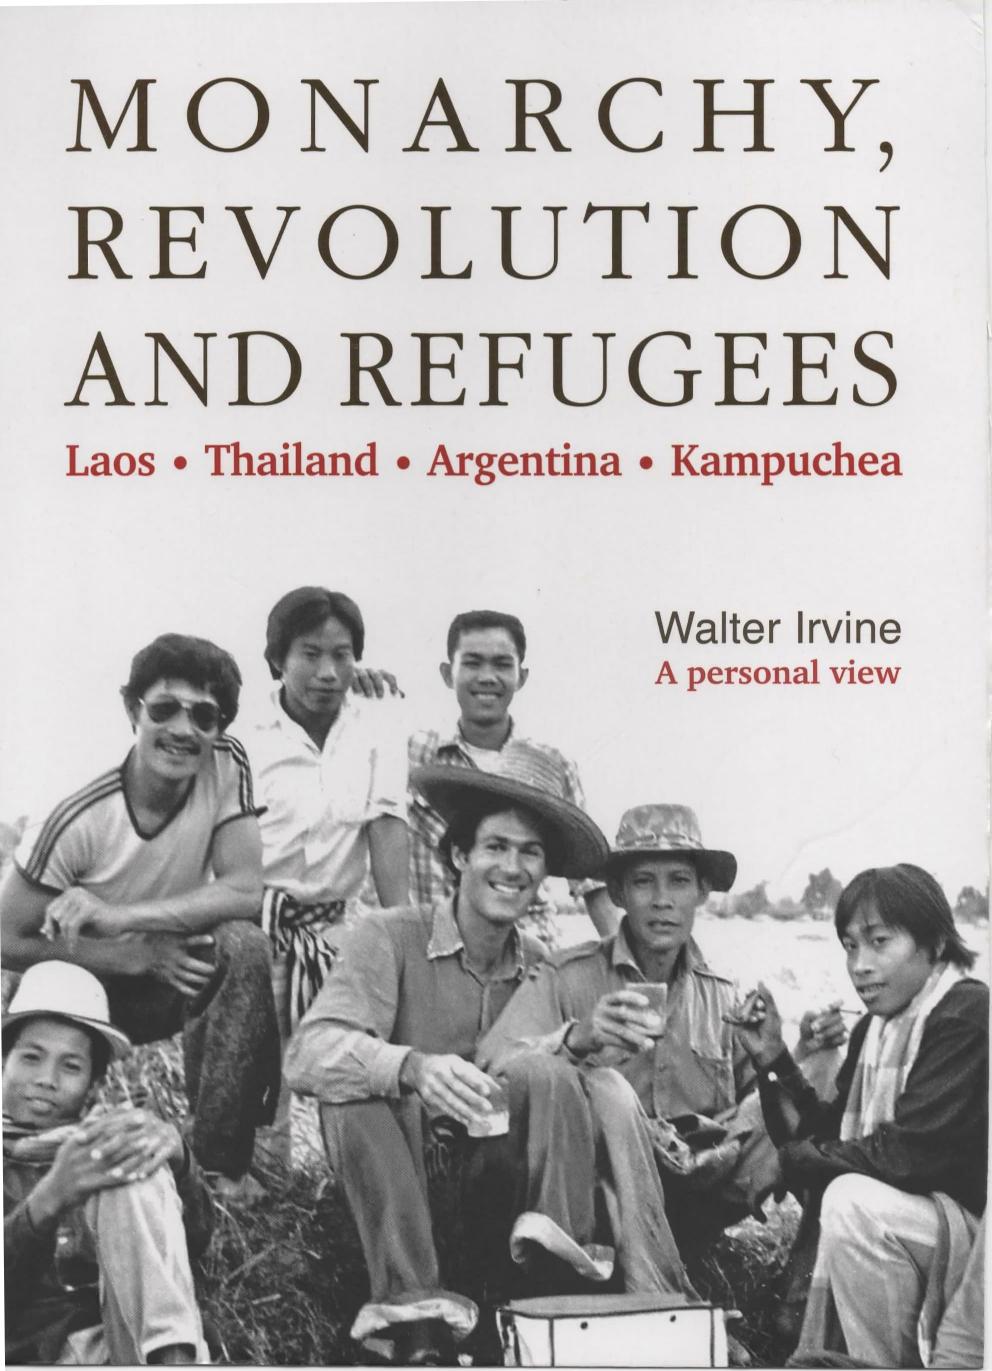 Monarchy, Revolution and Refugees. Laos, Thailand, Argentina, Kampuchea by Walter Irvine